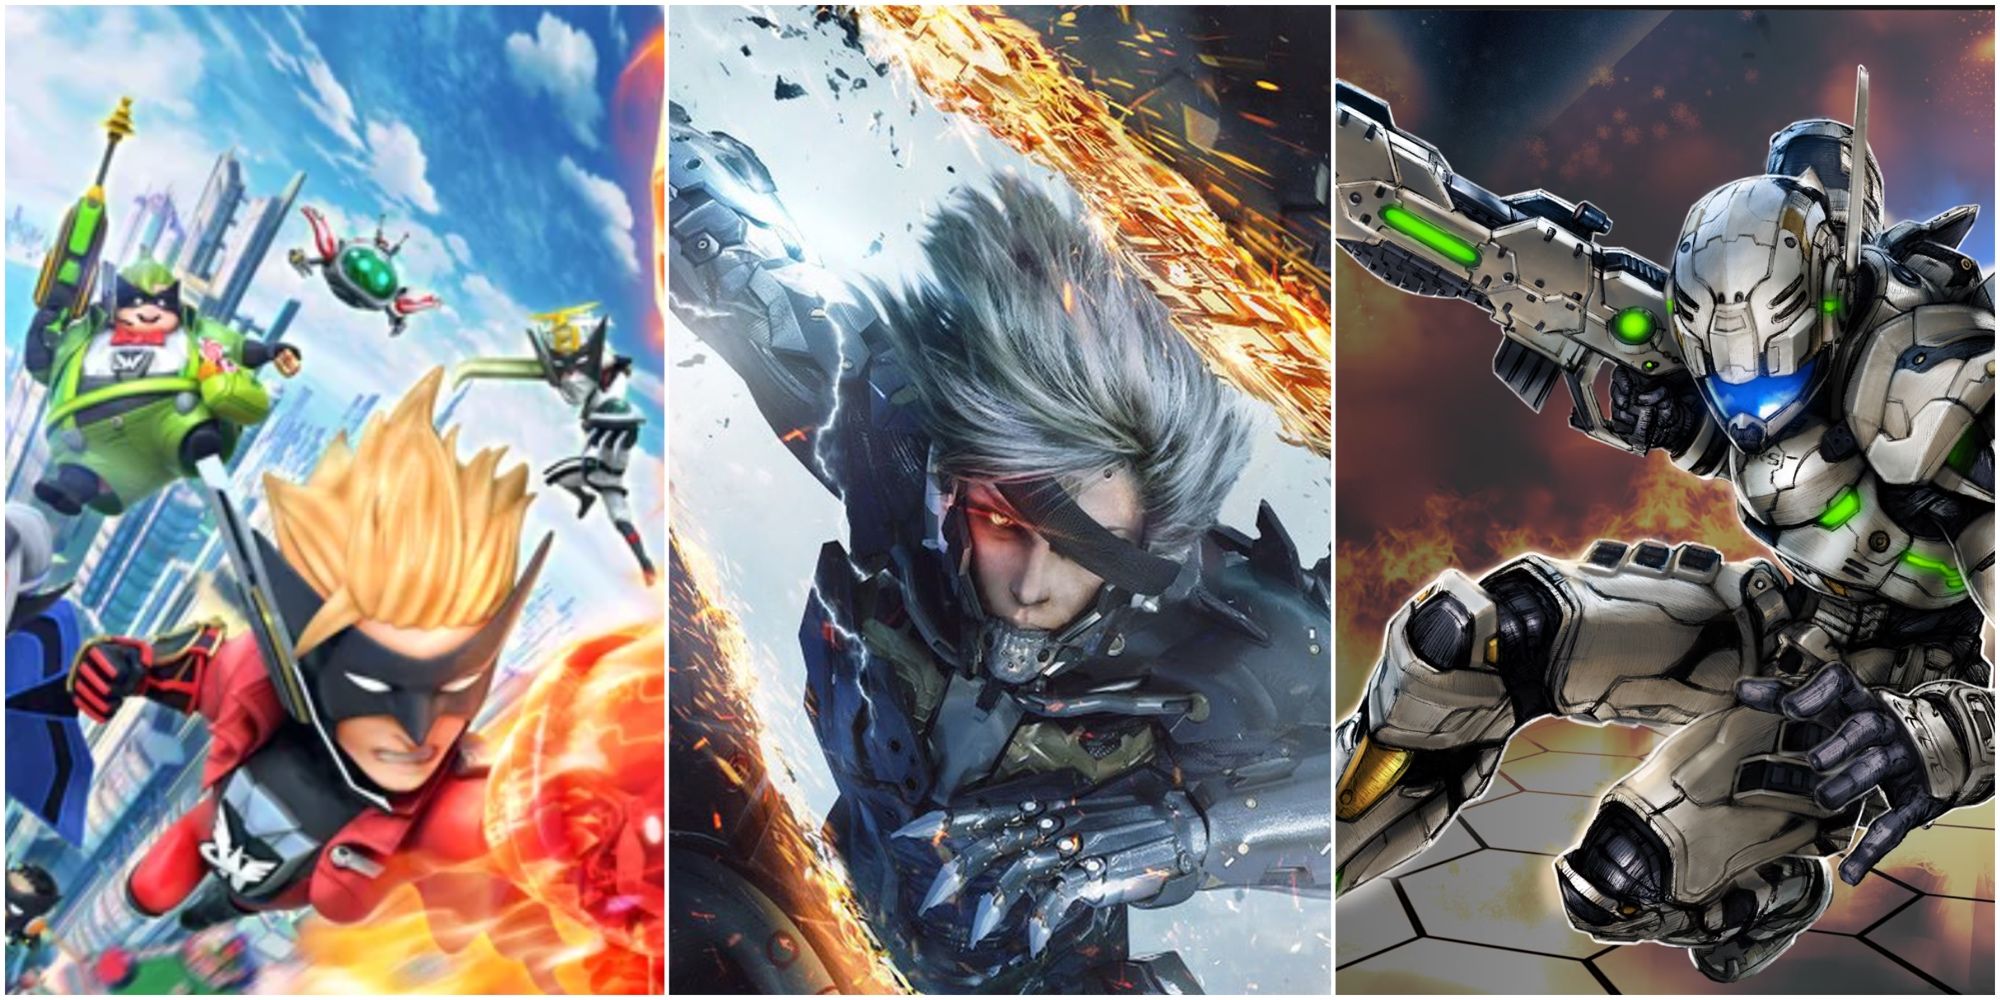 Split image Wonderful 101, Metal Gear Rising: Revengeance, and Vanquish protagonists in action poses